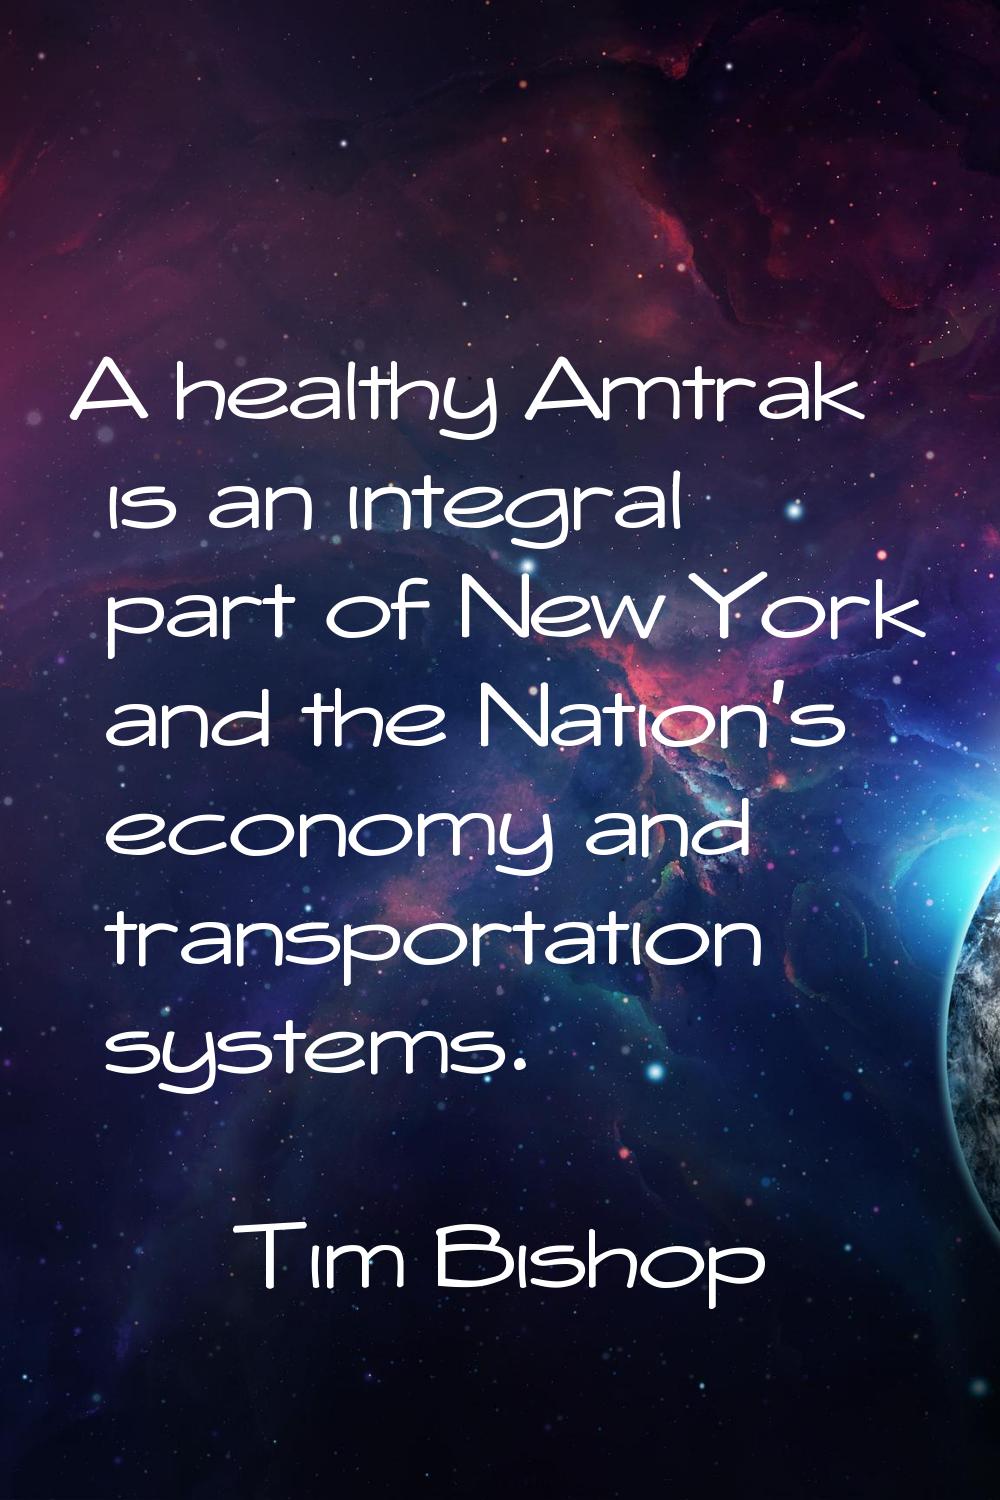 A healthy Amtrak is an integral part of New York and the Nation's economy and transportation system